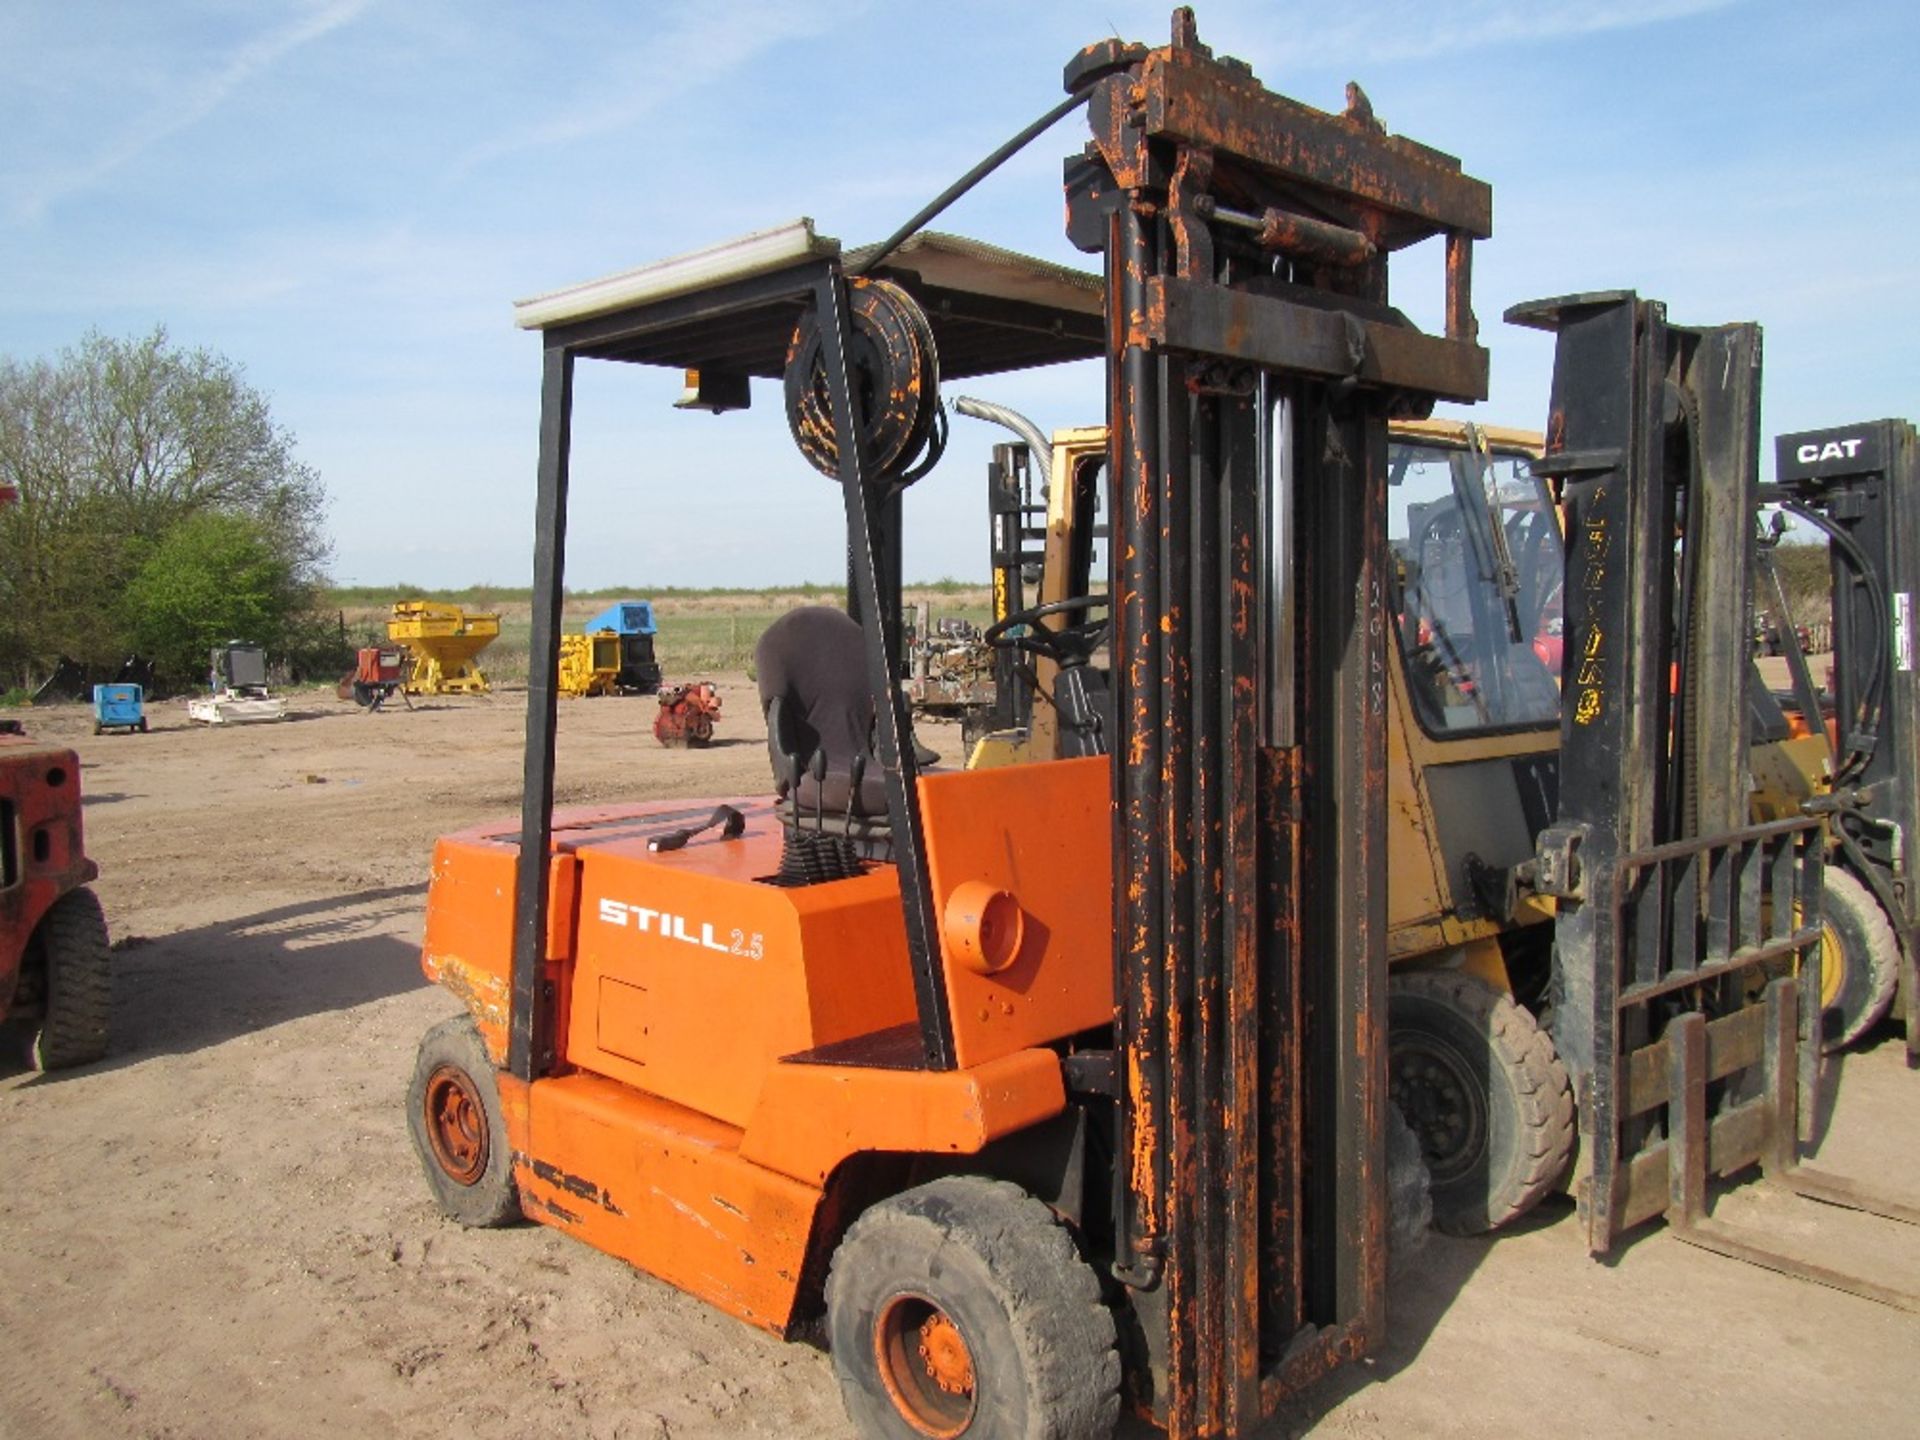 Stihl 2.5 Ton Forklift UNRESERVED LOT - Image 2 of 5